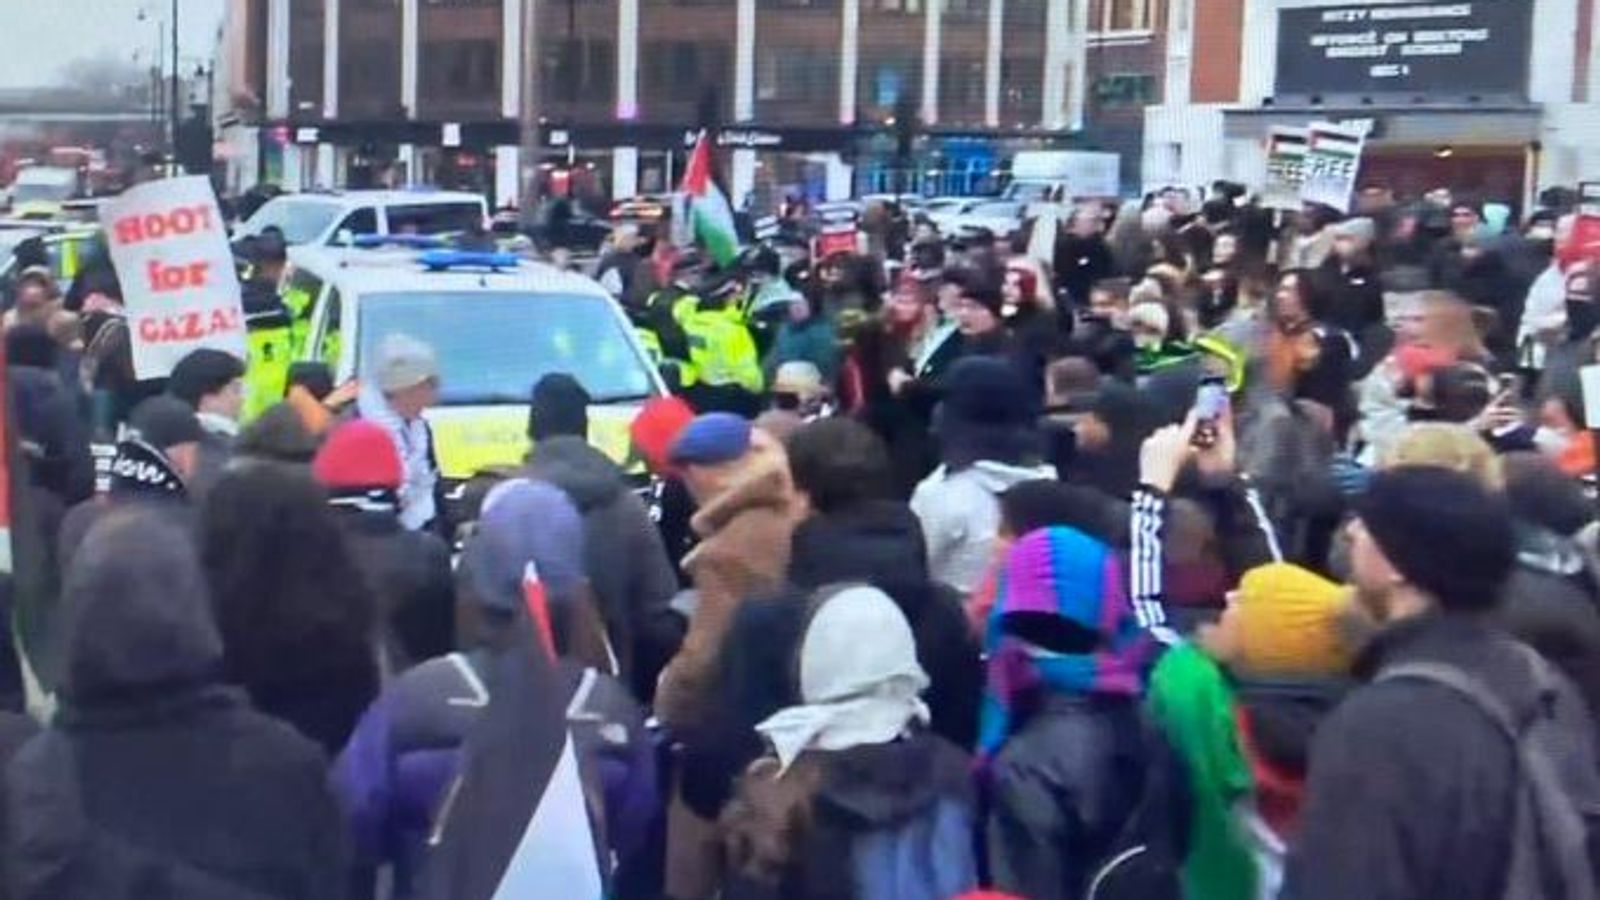 Pro-Palestinian protesters block police cars as two arrested at rally in Brixton | UK News